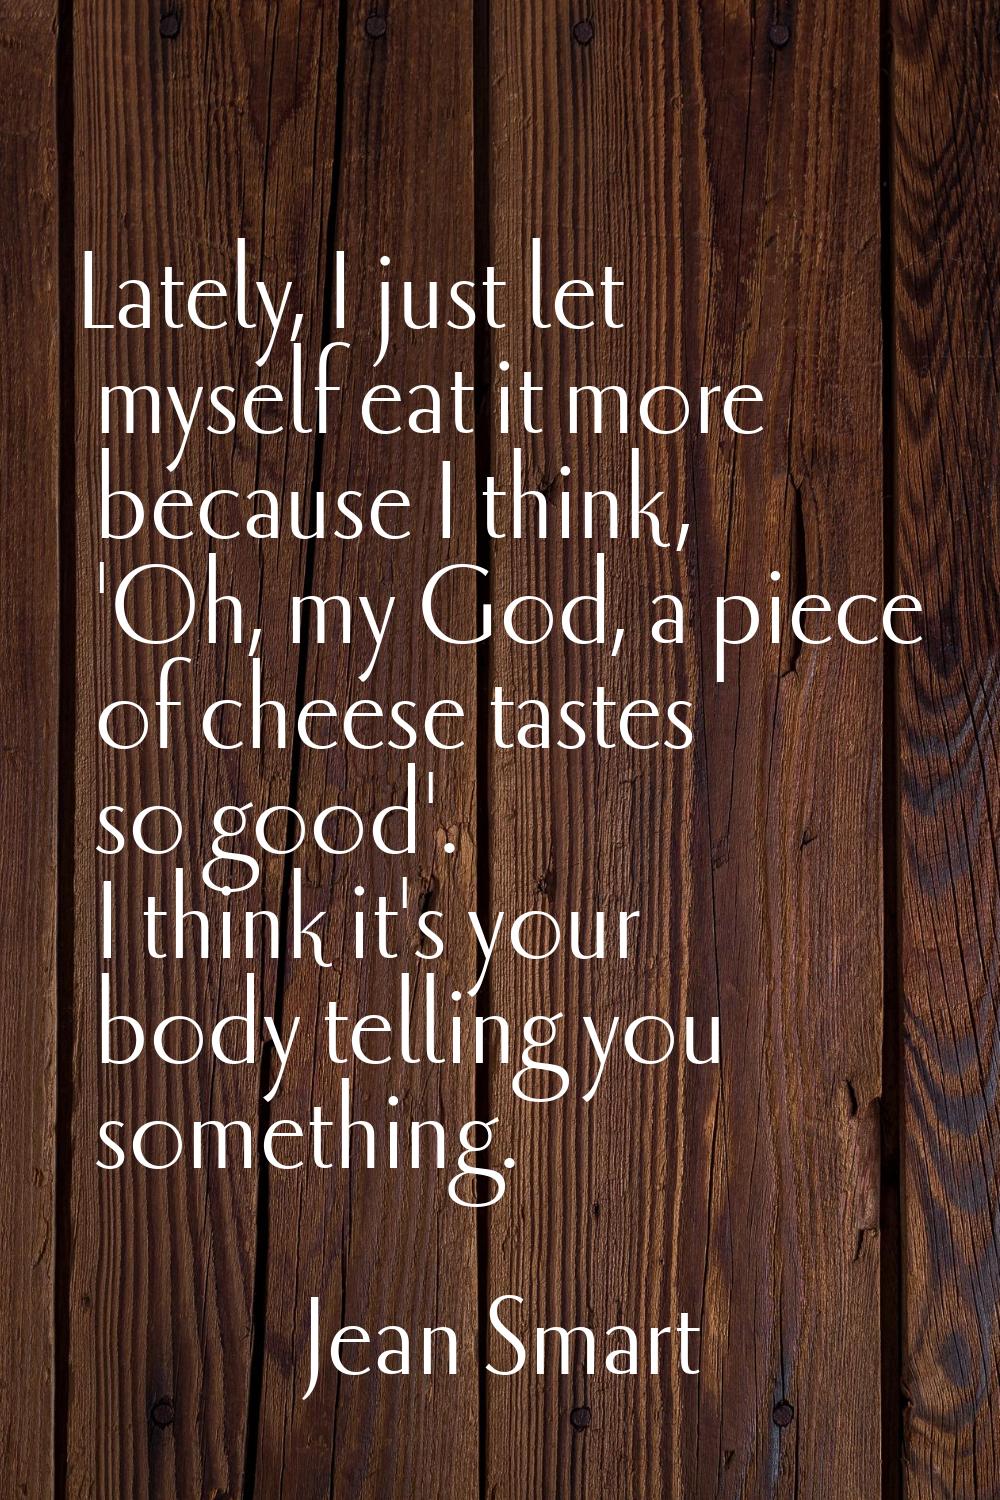 Lately, I just let myself eat it more because I think, 'Oh, my God, a piece of cheese tastes so goo